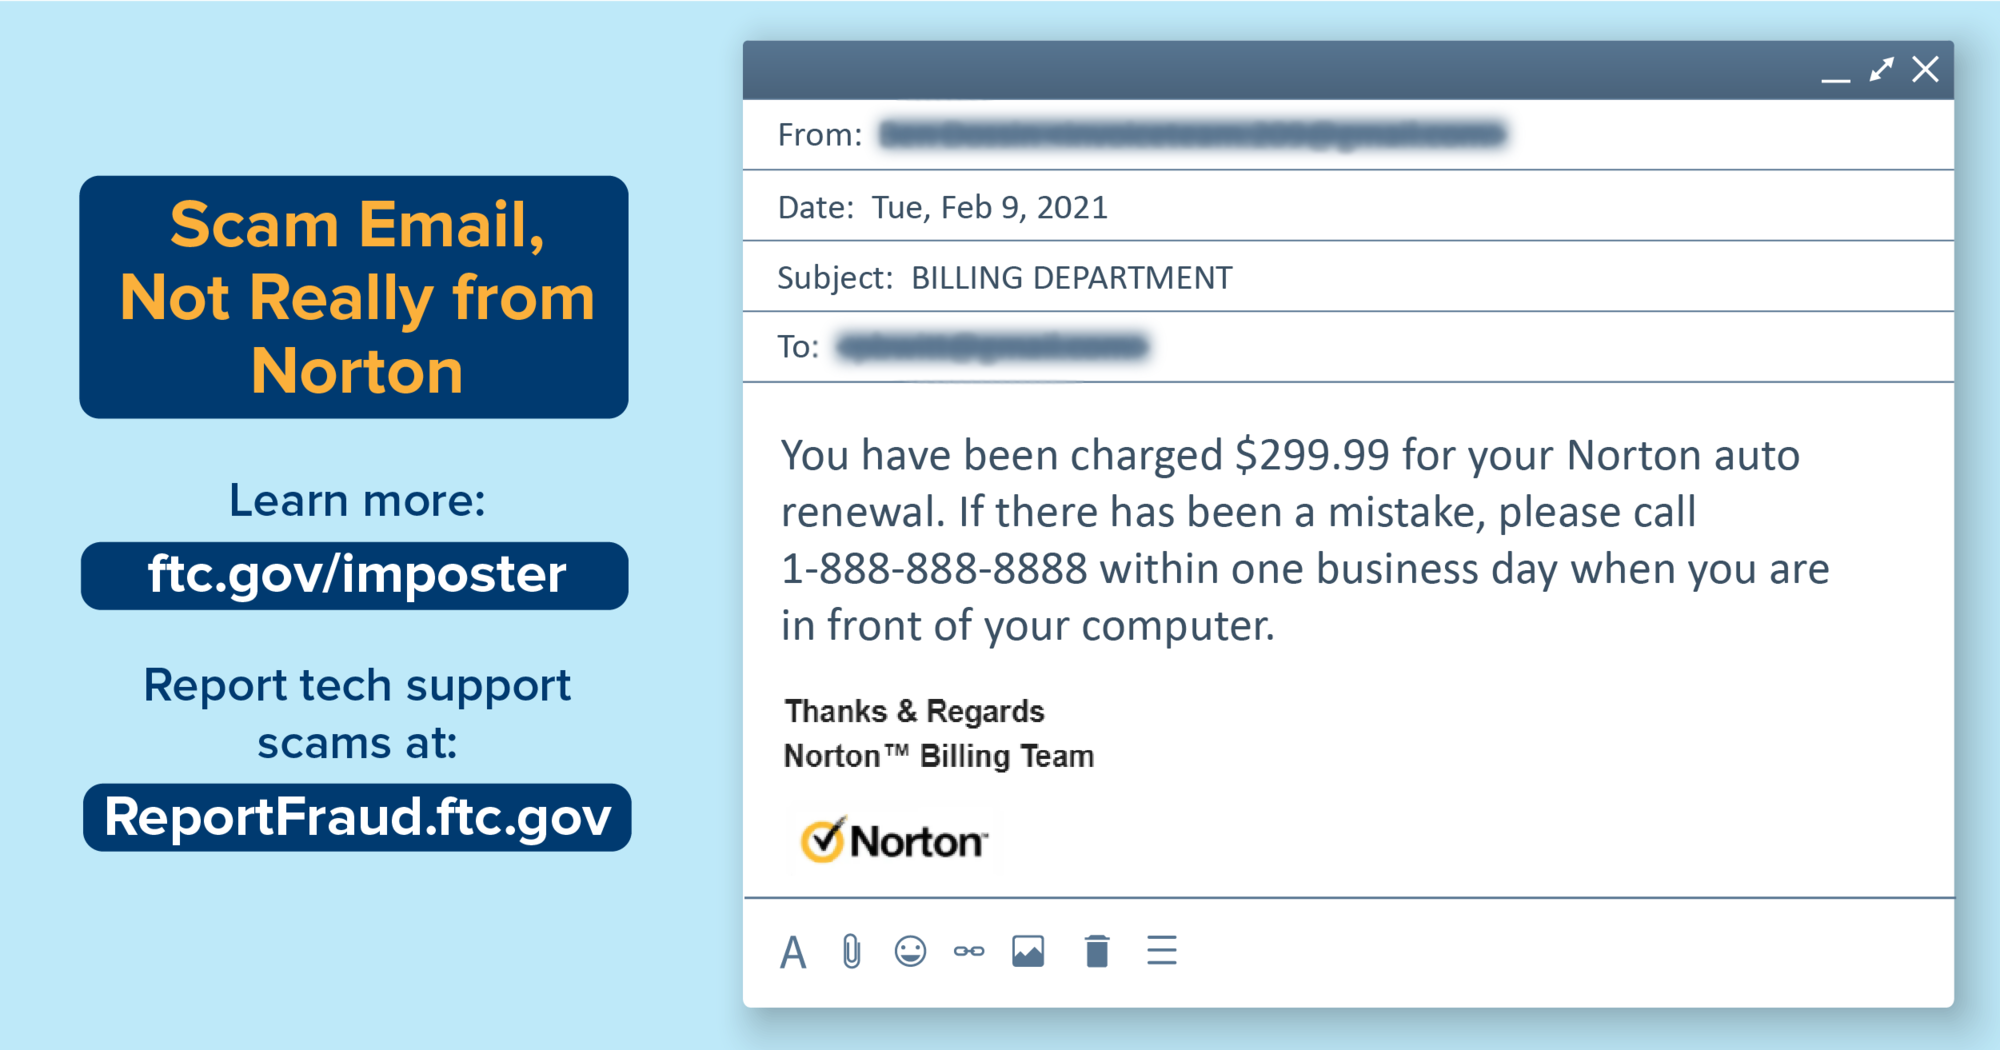 Scam Email, Not Really from Norton